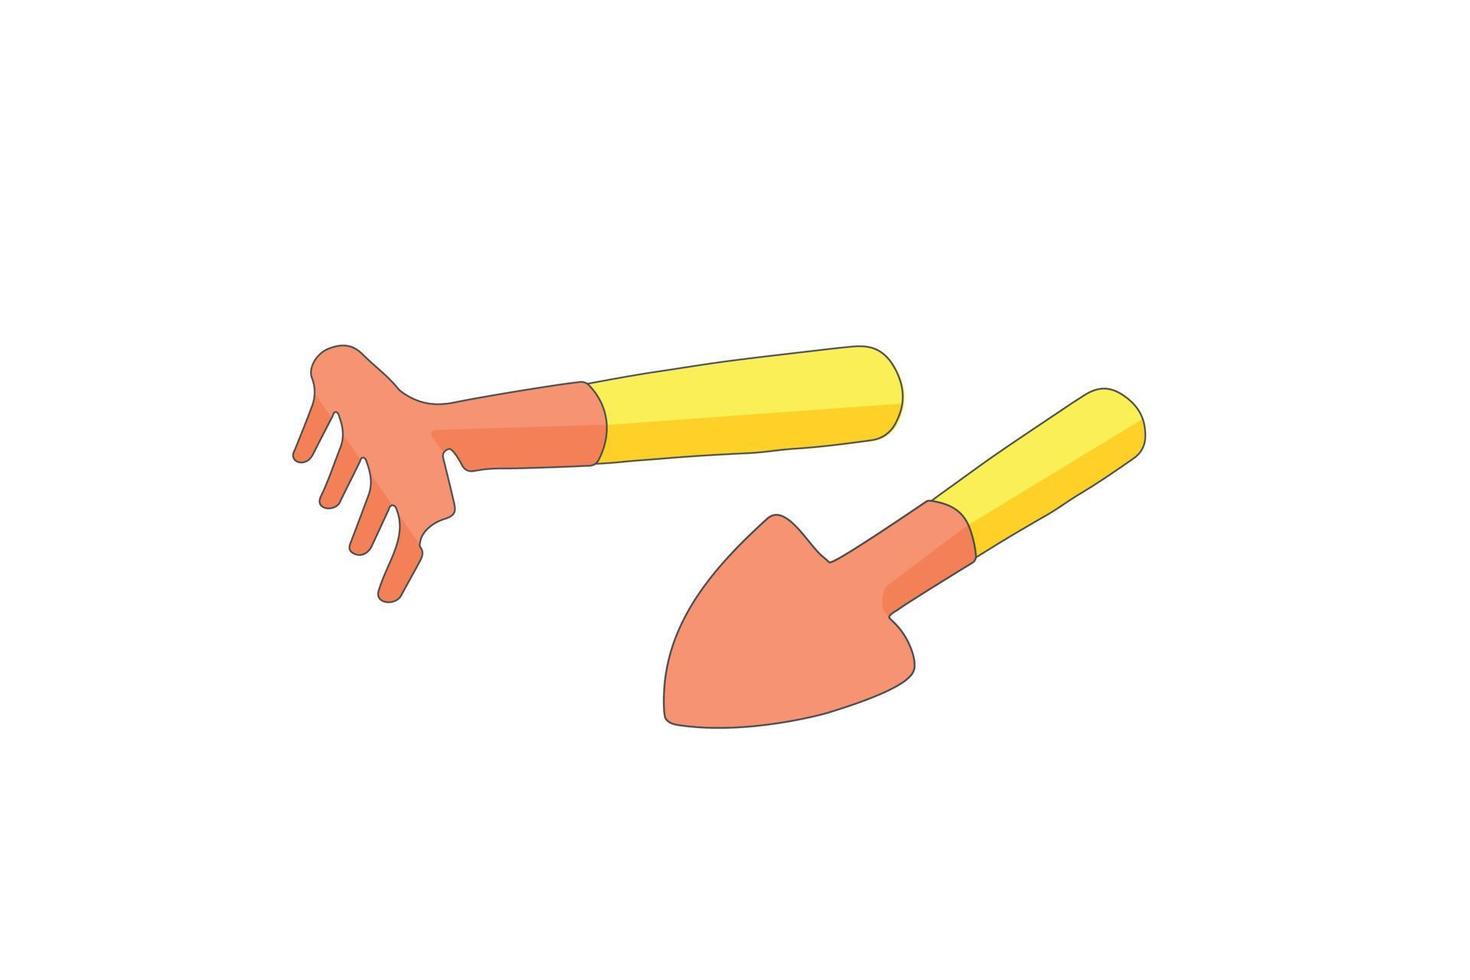 A shovel and rake icon on a white background. Design of garden tools. Vector illustration